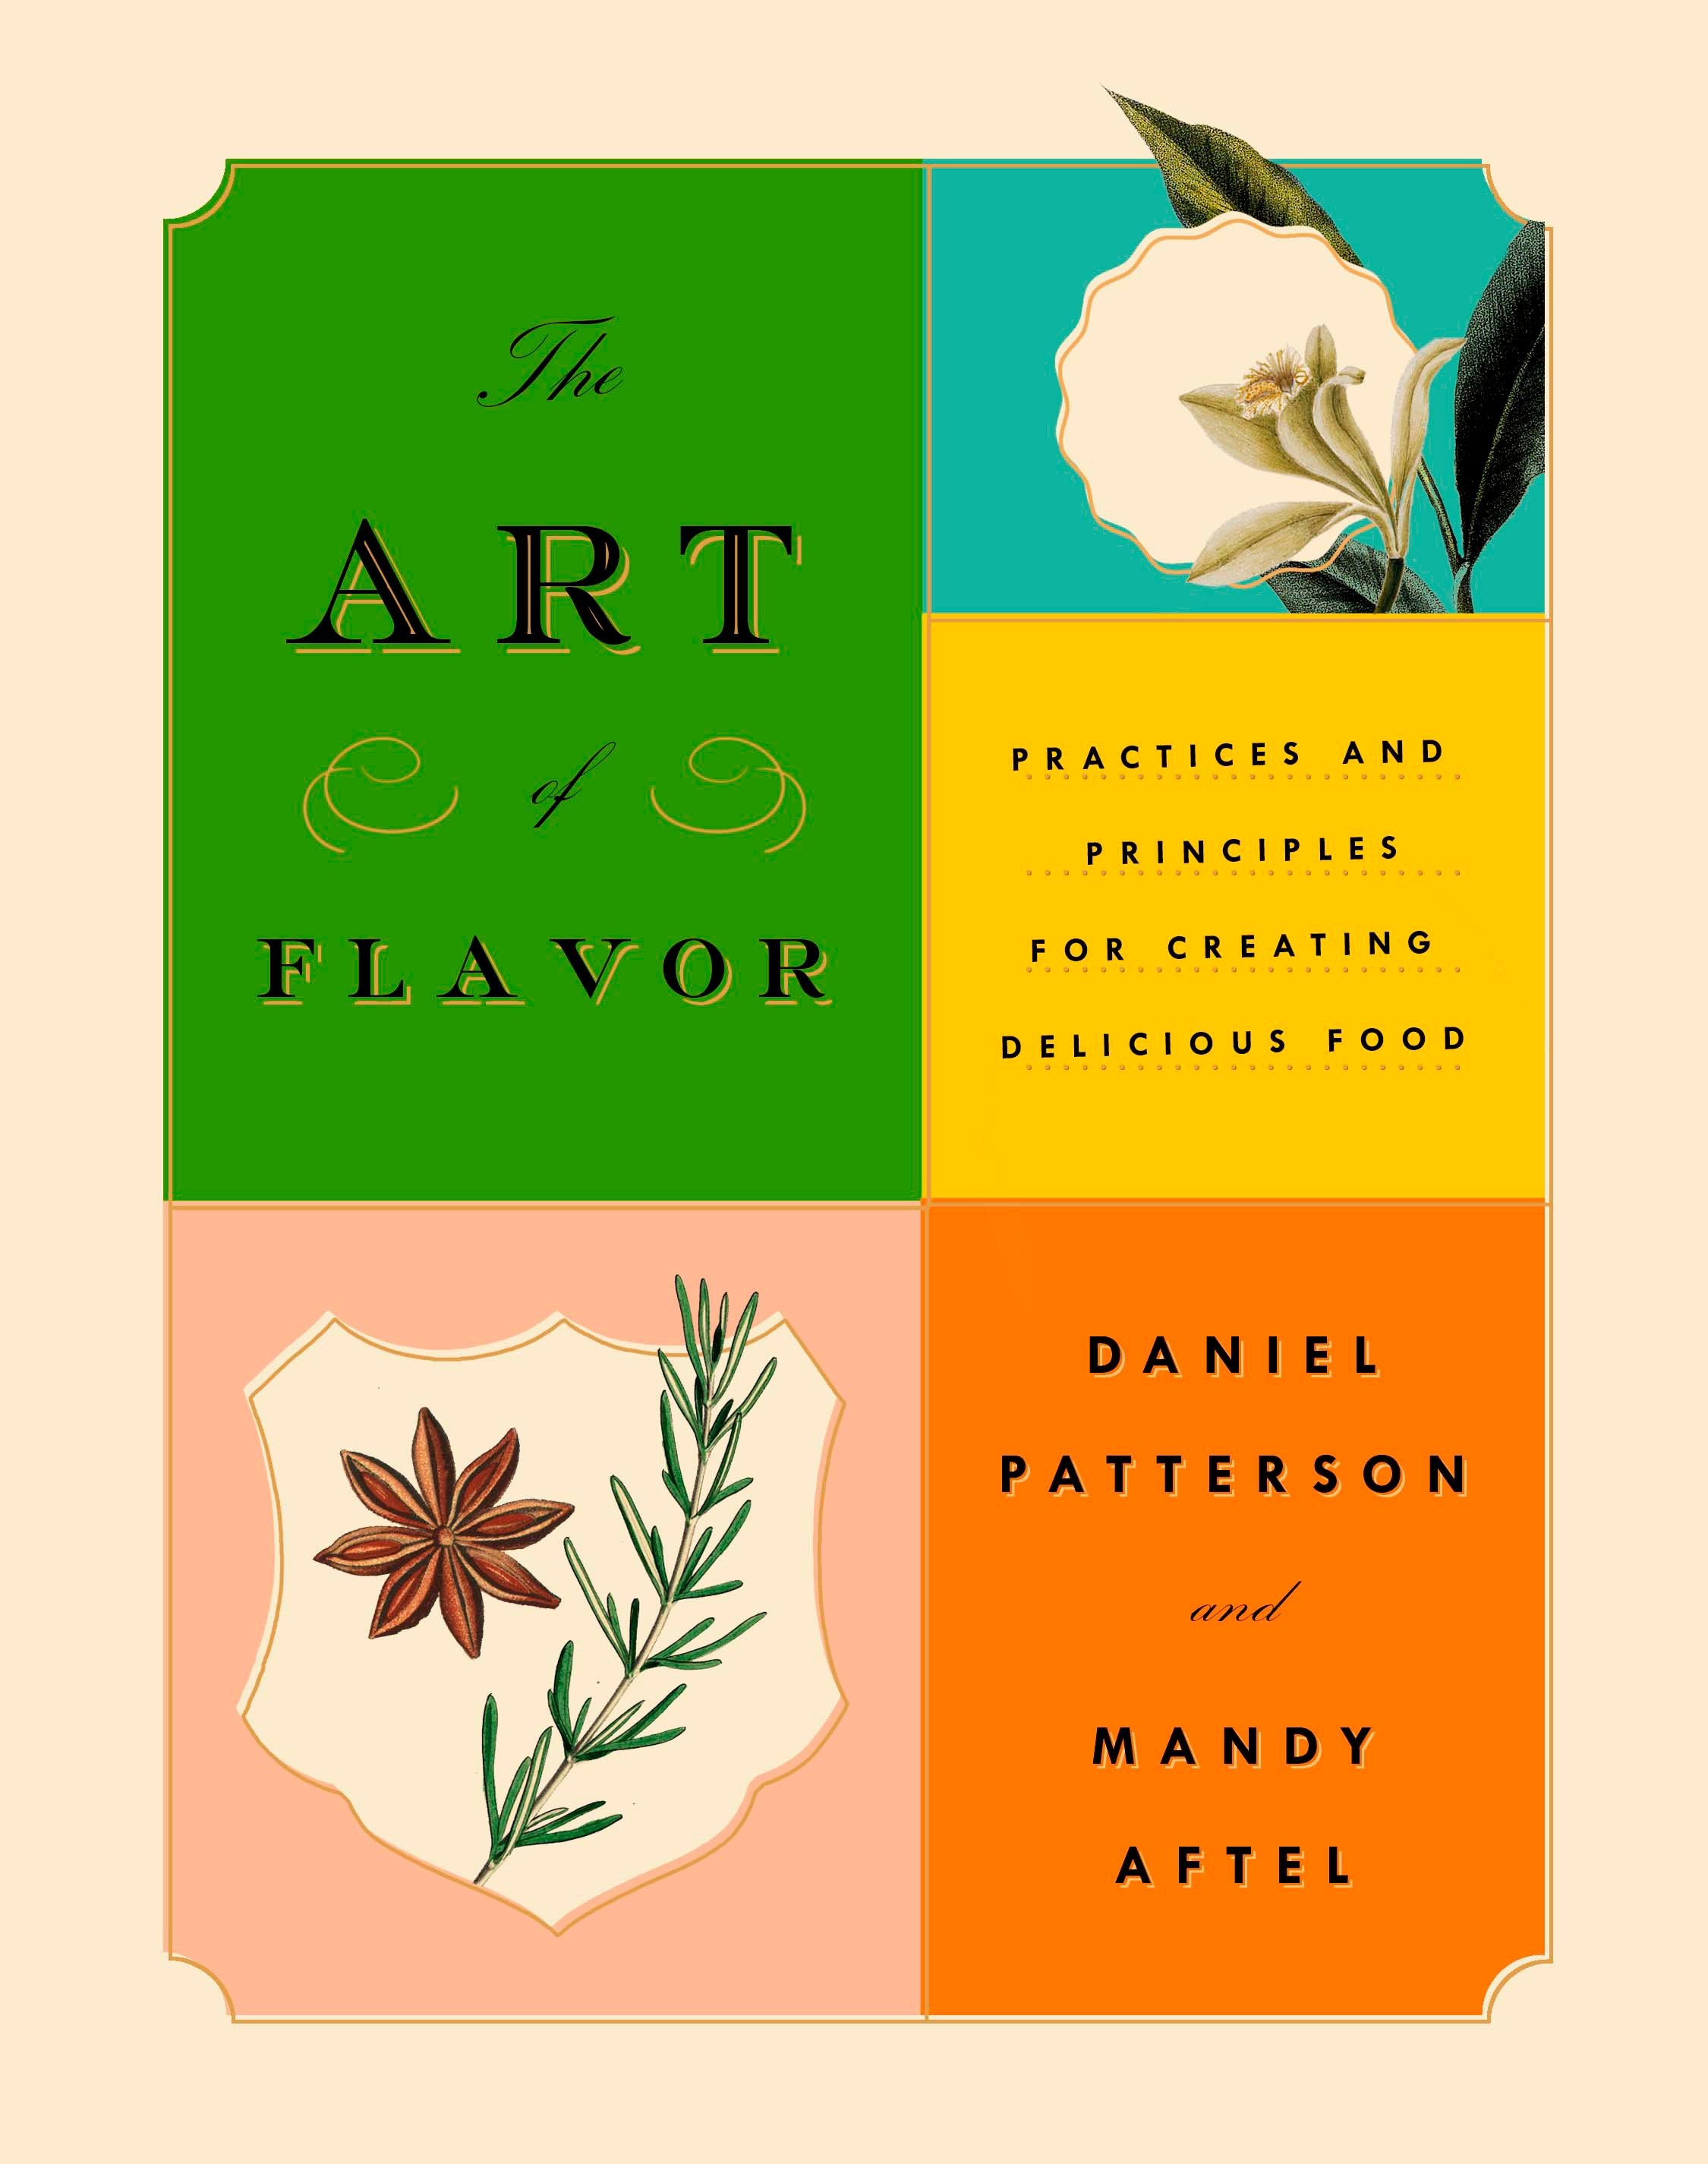 The art of flavor practices and principles for creating delicious food cover image